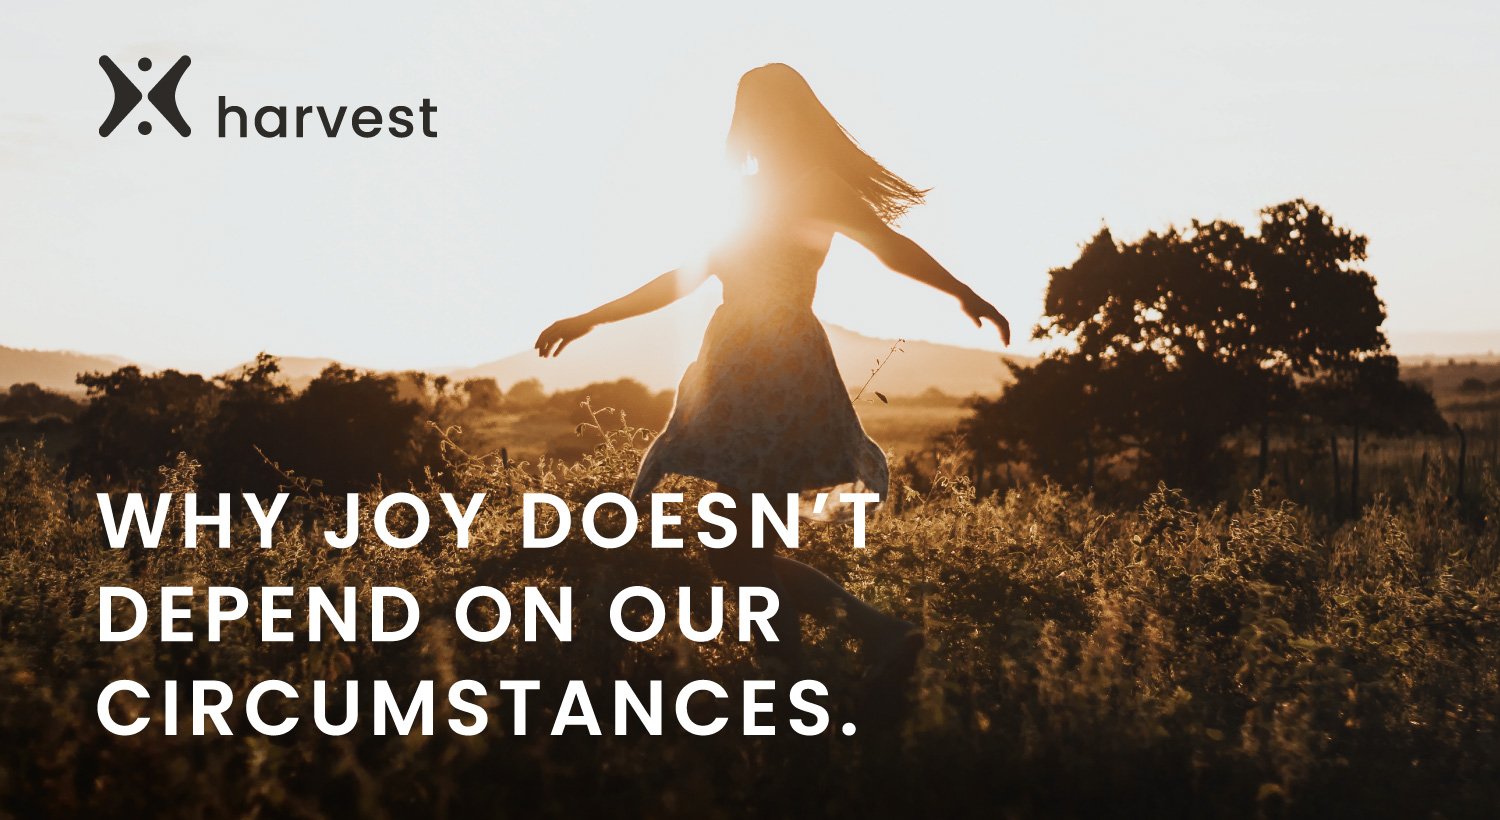 Why joy doesn’t depend on our circumstances.